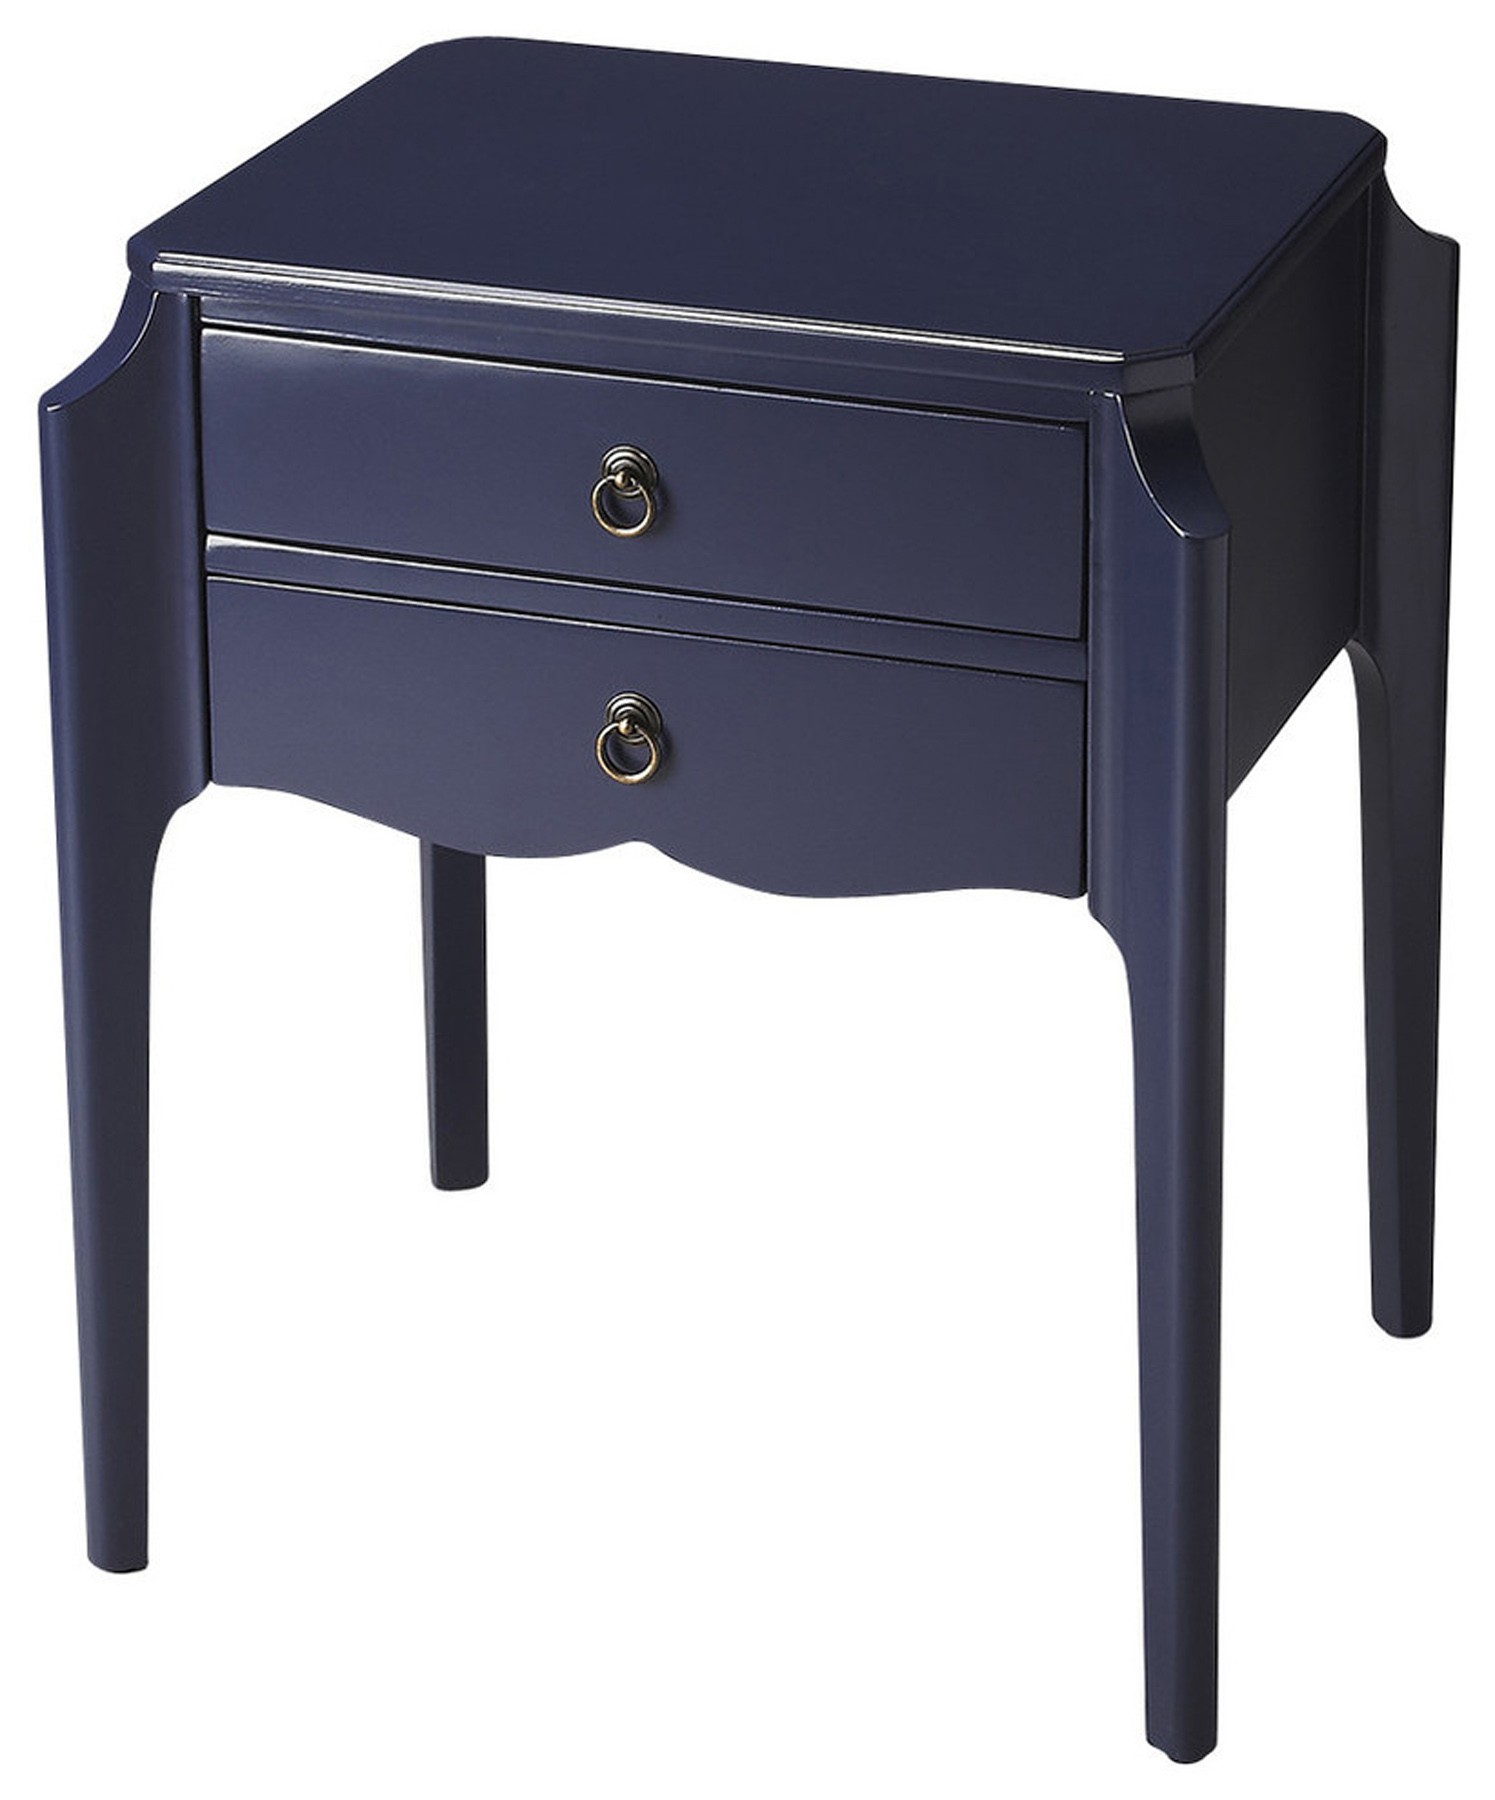 butler specialty navy blue wilshire two drawer accent shaped table tables small round pedestal end wood steel coffee outdoor and chairs dresser cabinet new vintage furniture